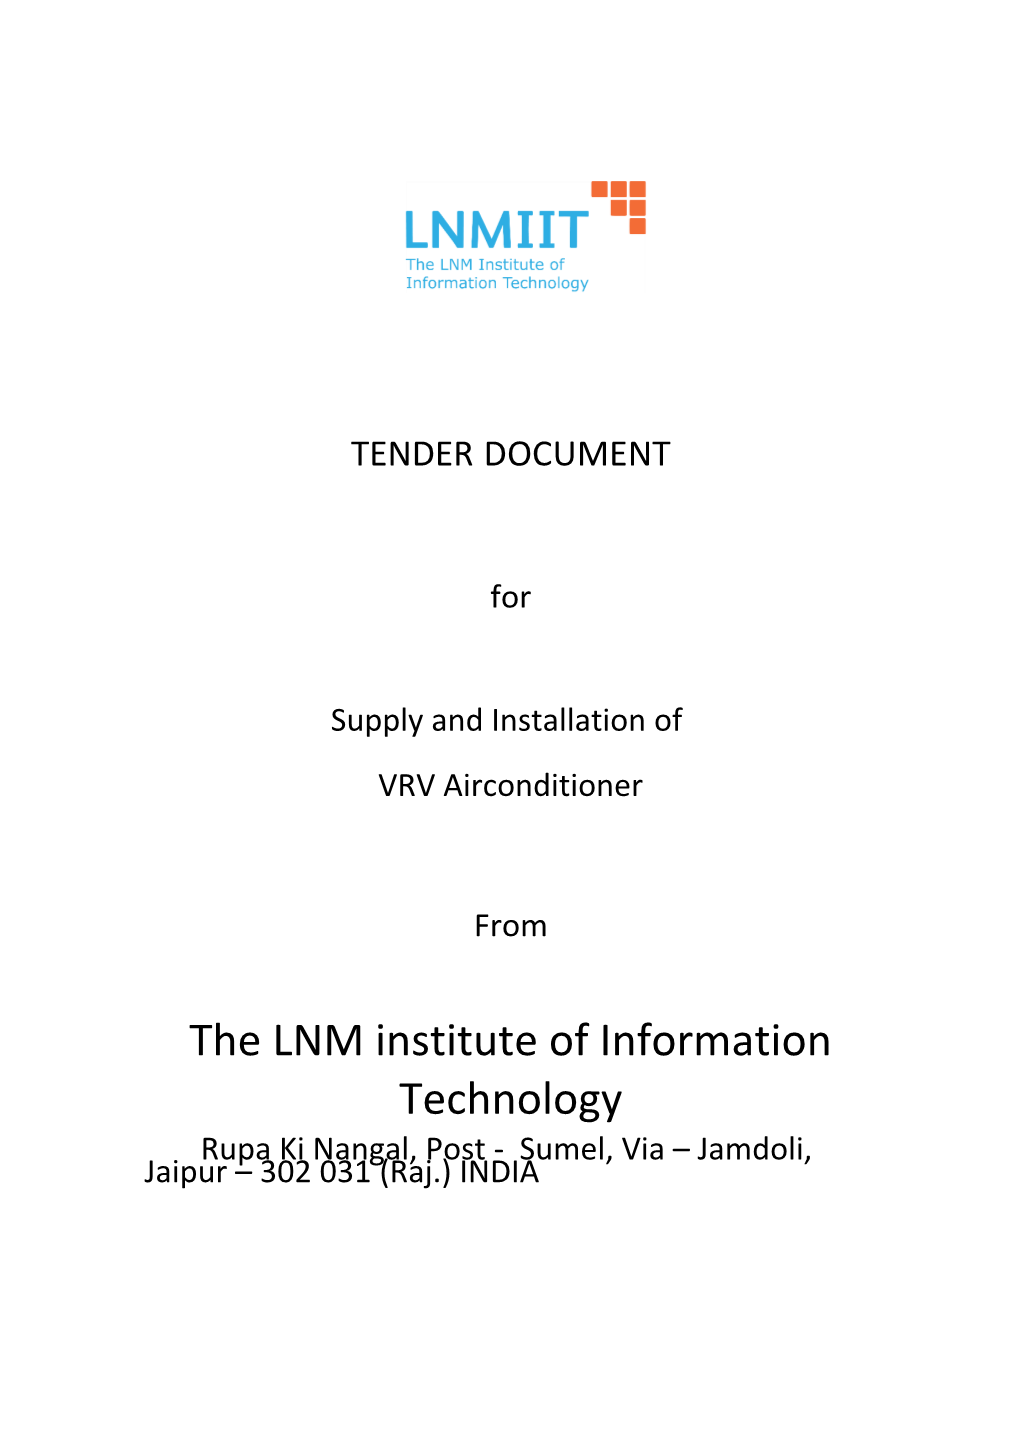 The LNM Institute of Information Technology